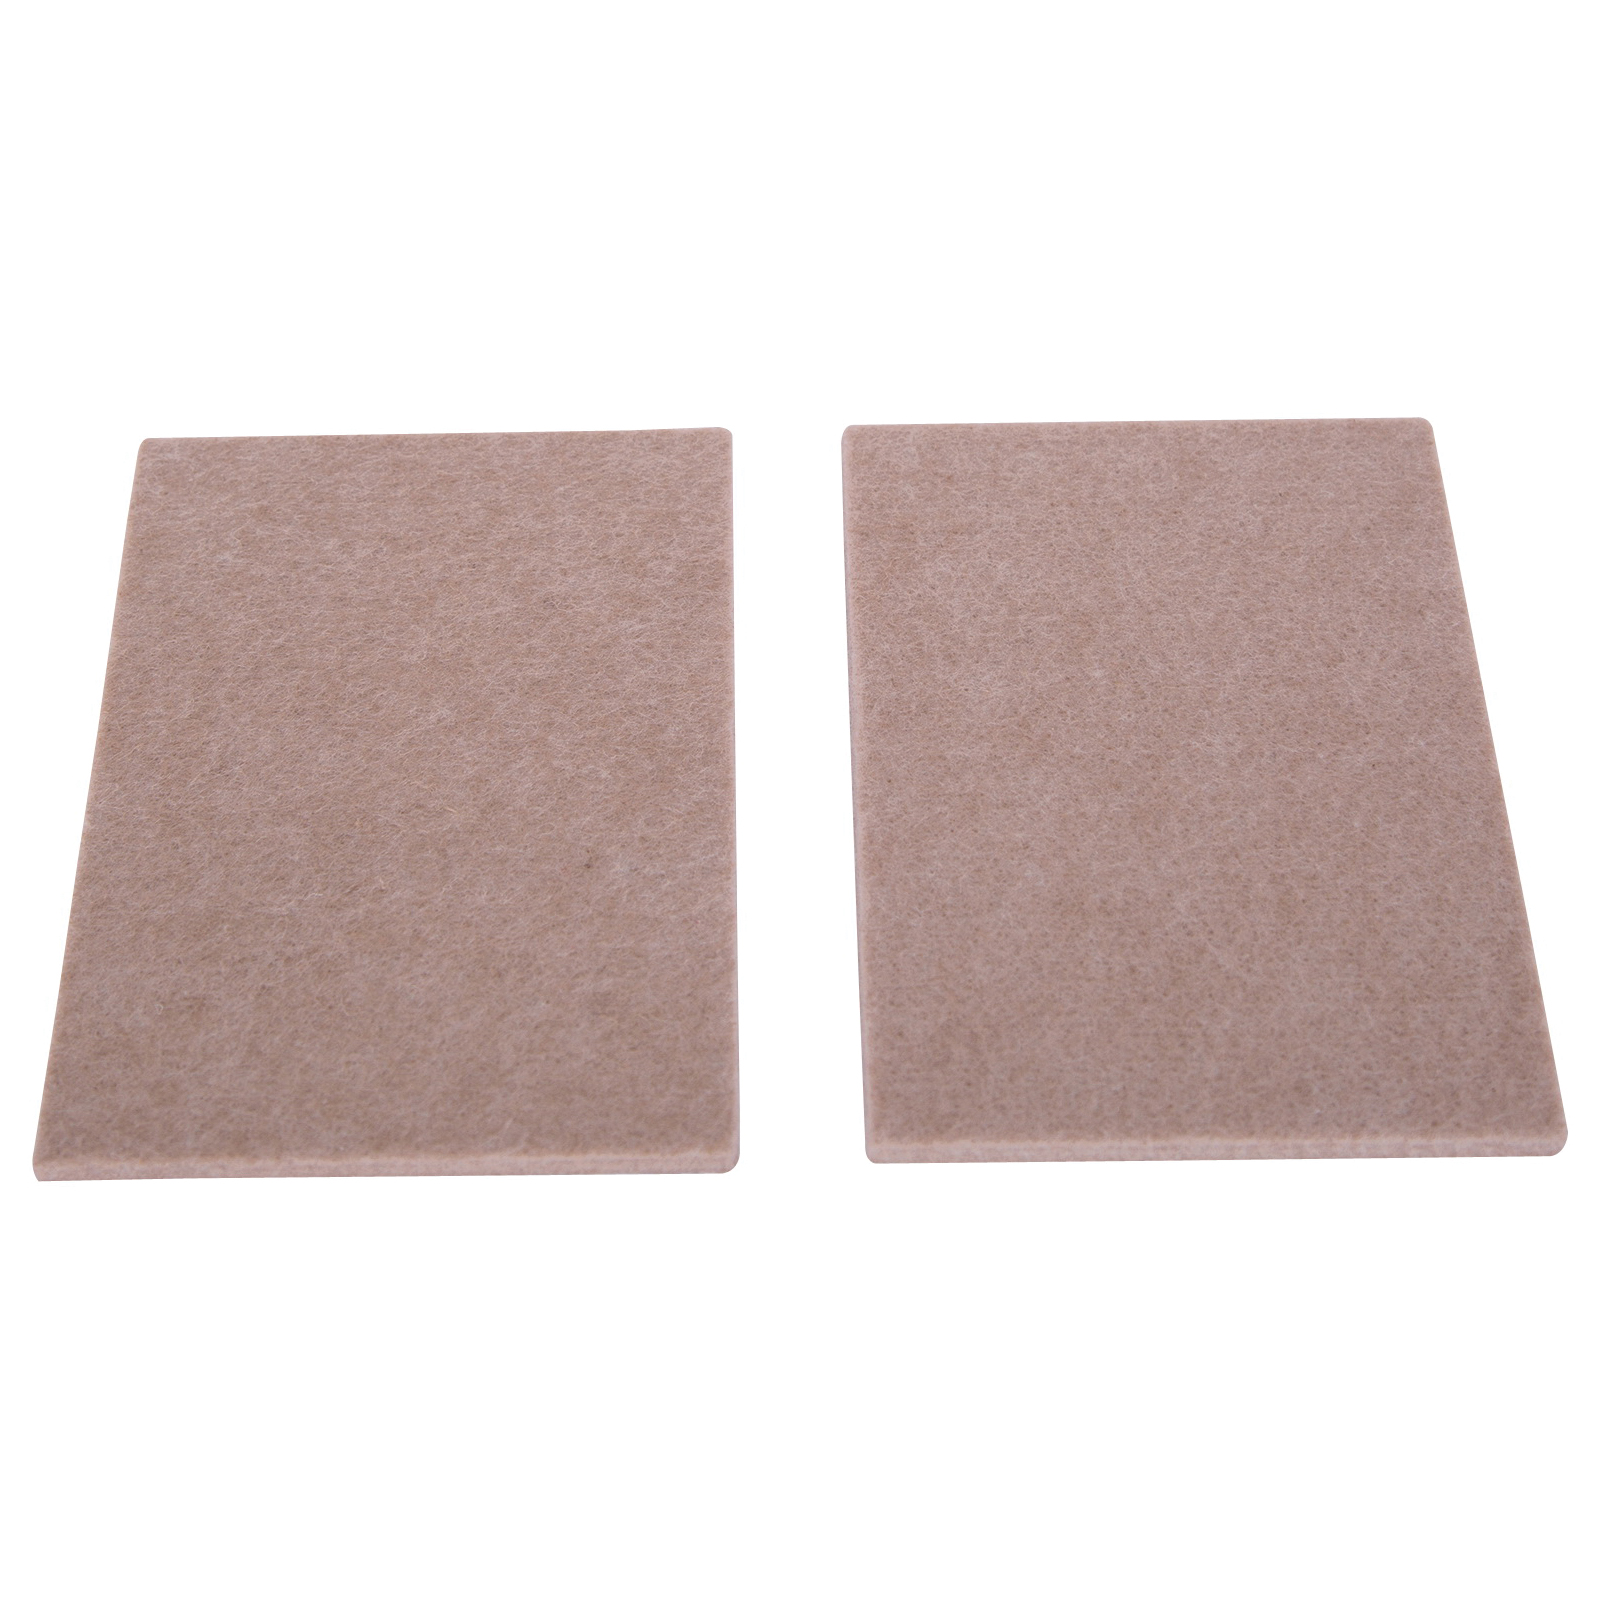 FE-S105-PS Furniture Pad, Felt Cloth, Beige, 4-1/2 x 6 in Dia, 4-1/2 in W, 3/16 in Thick, Square